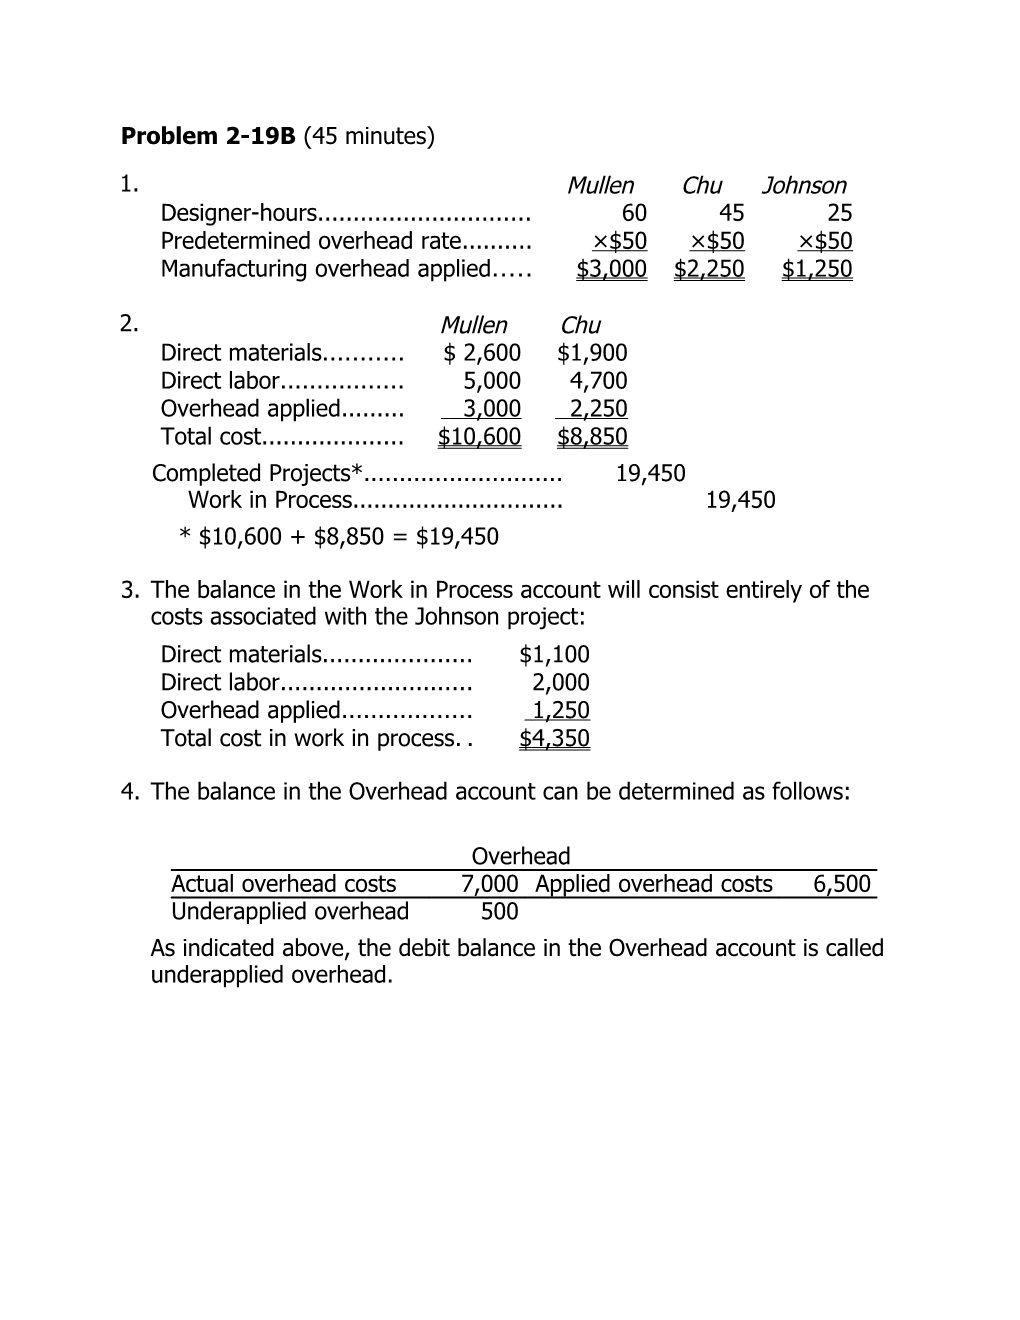 4.The Balance in the Overhead Account Can Be Determined As Follows